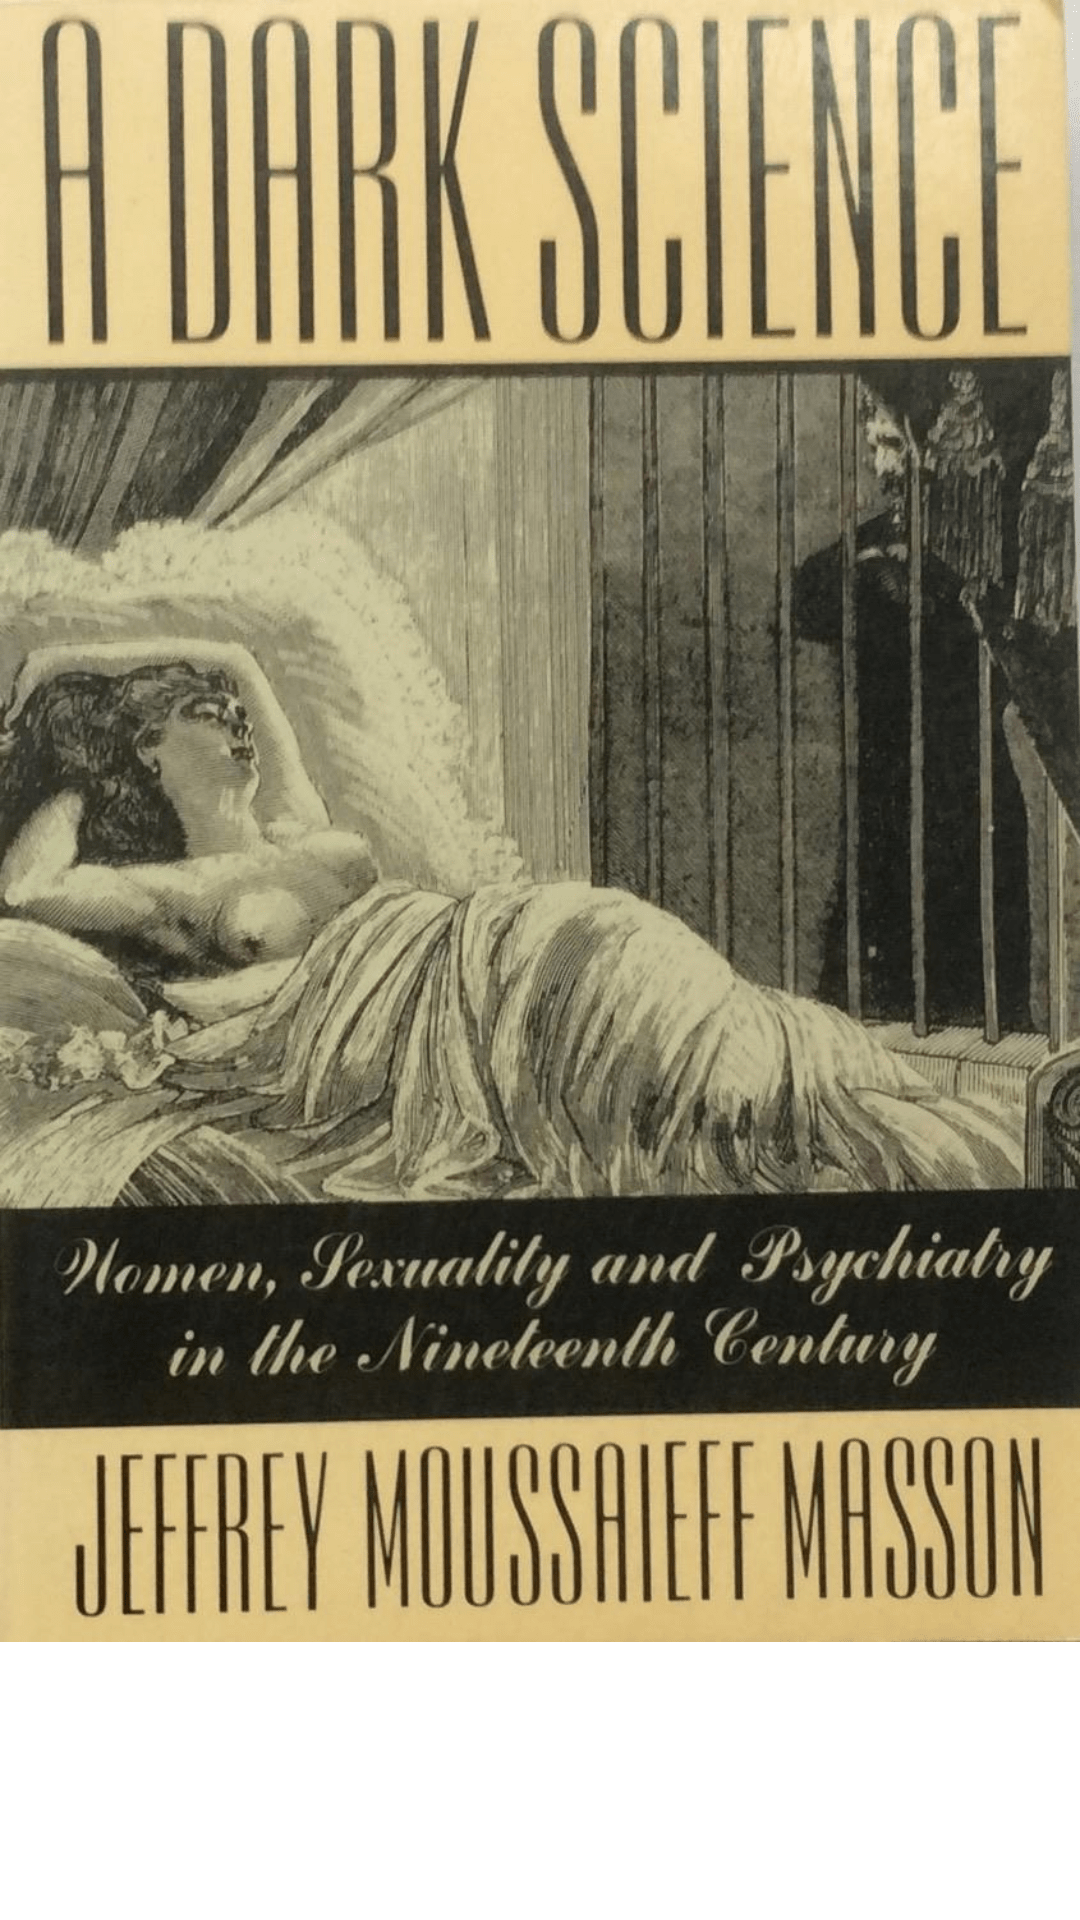 A Dark Science : Women, Sexuality, and Psychiatry in the Nineteenth Century